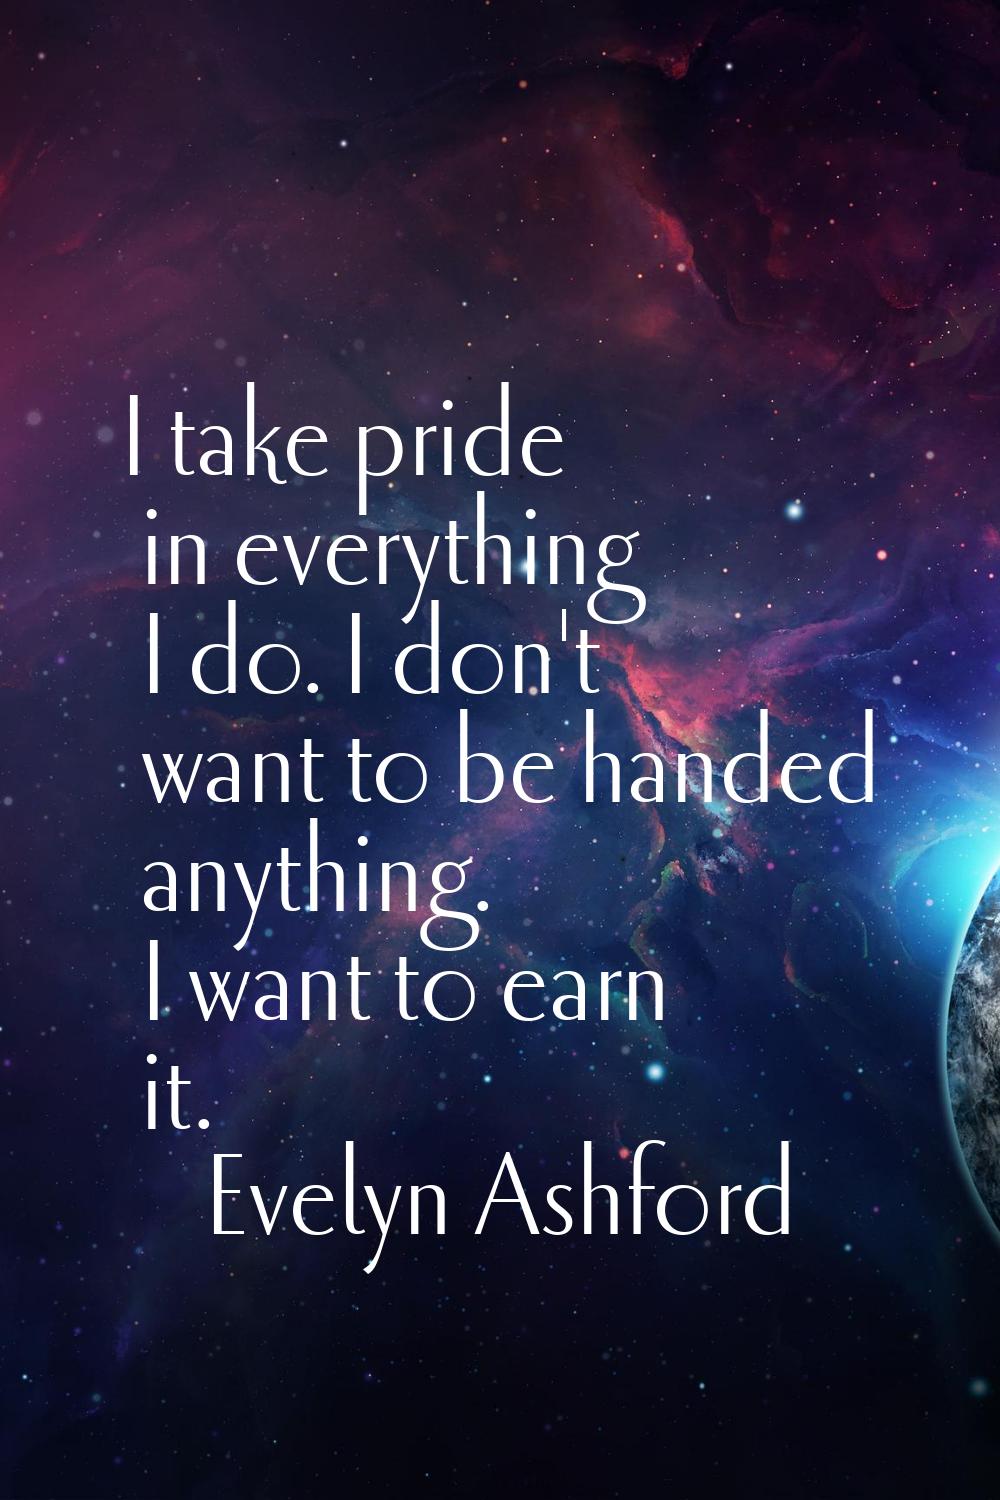 I take pride in everything I do. I don't want to be handed anything. I want to earn it.